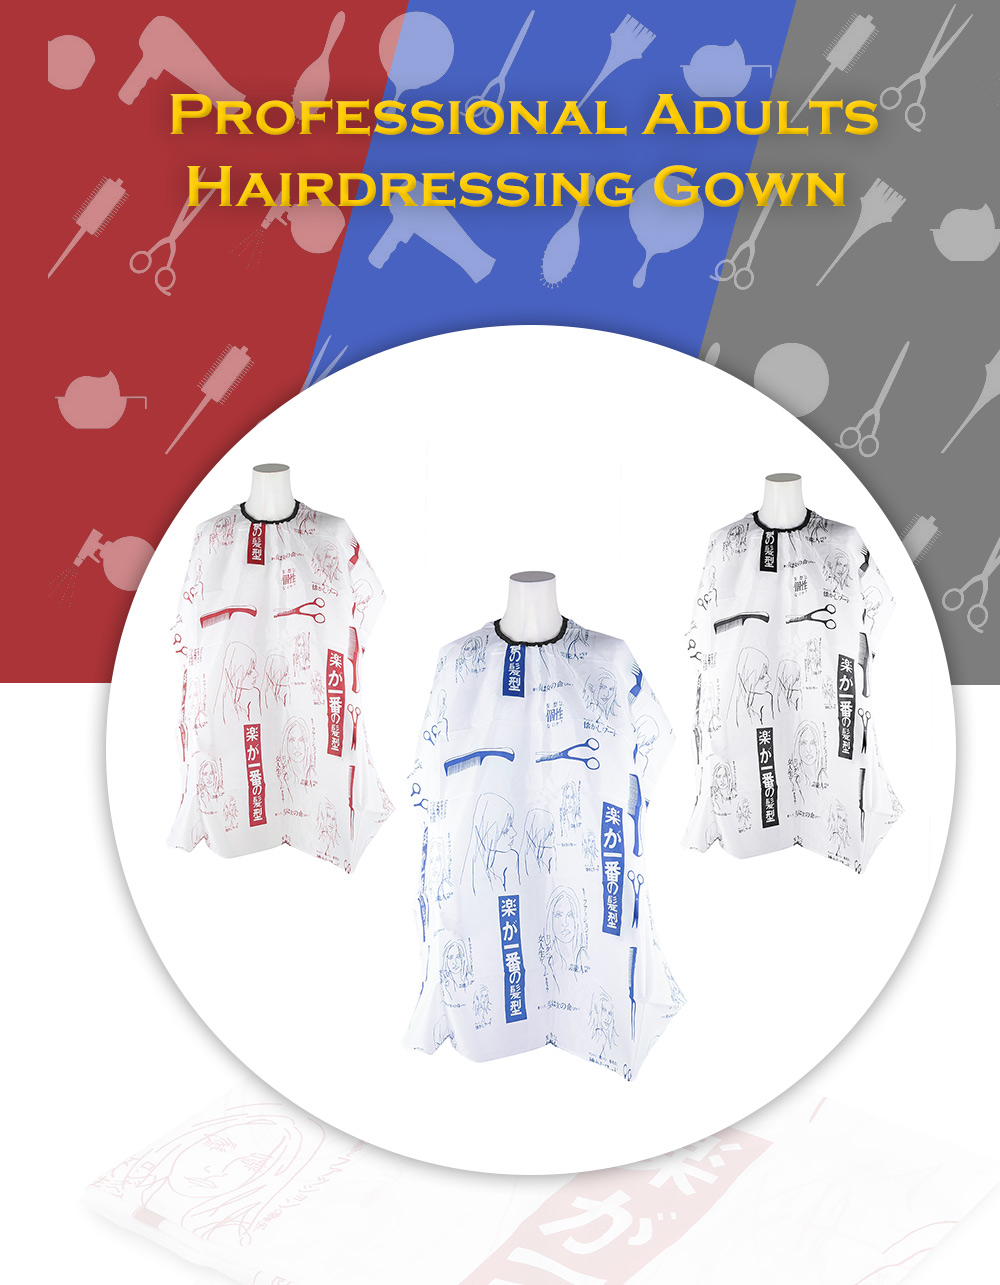 Professional Adults Hairdressing Gown